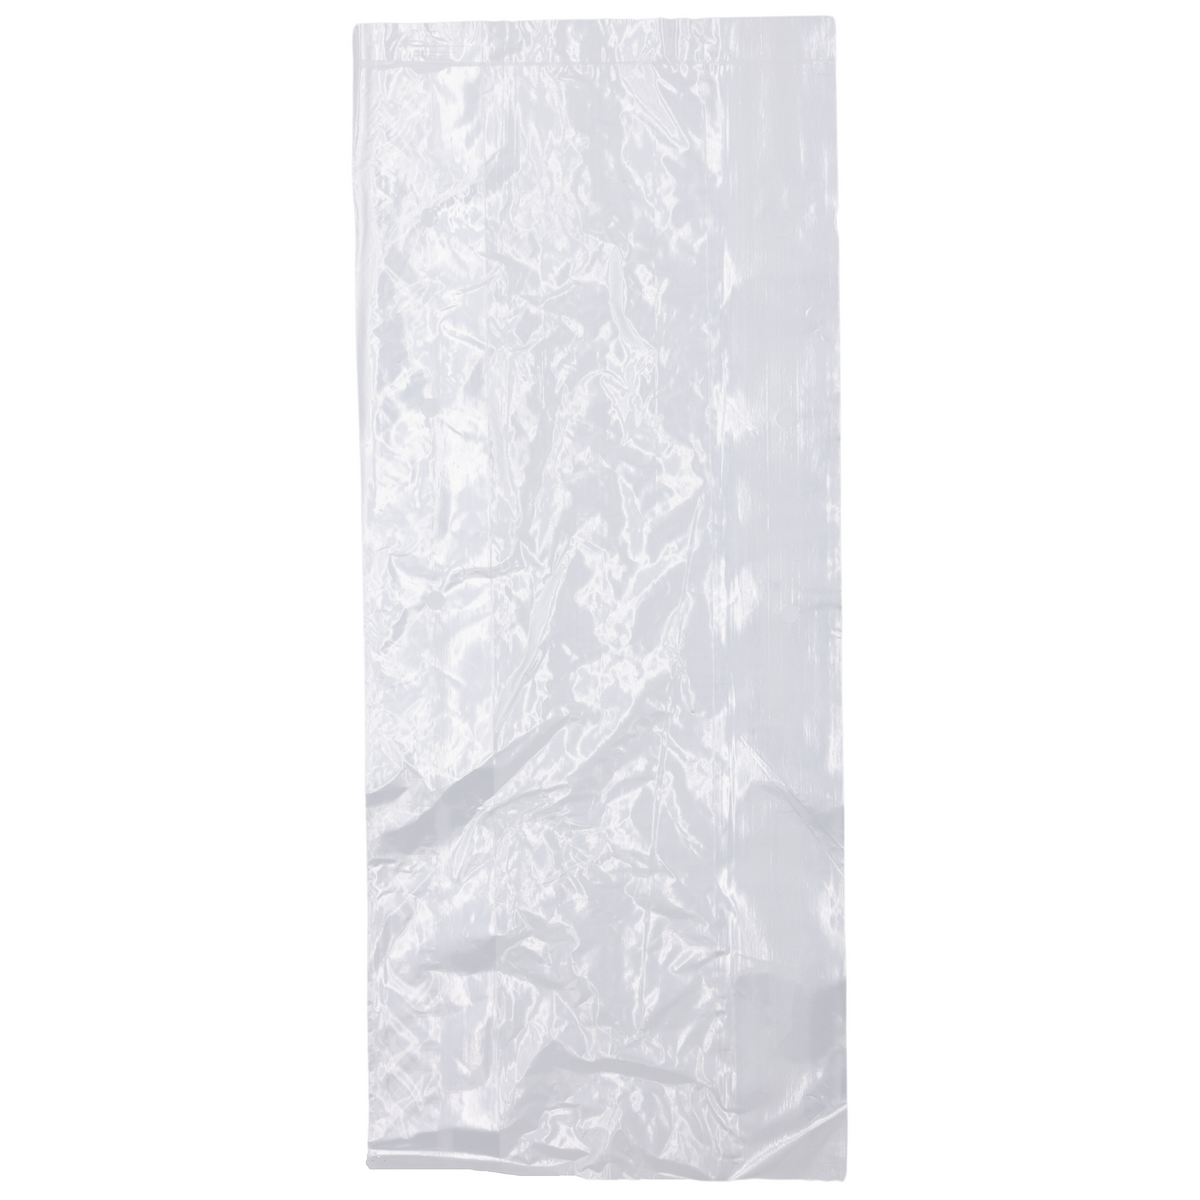 6+3x15Vents LDPE Clear Poly Bags(1000)